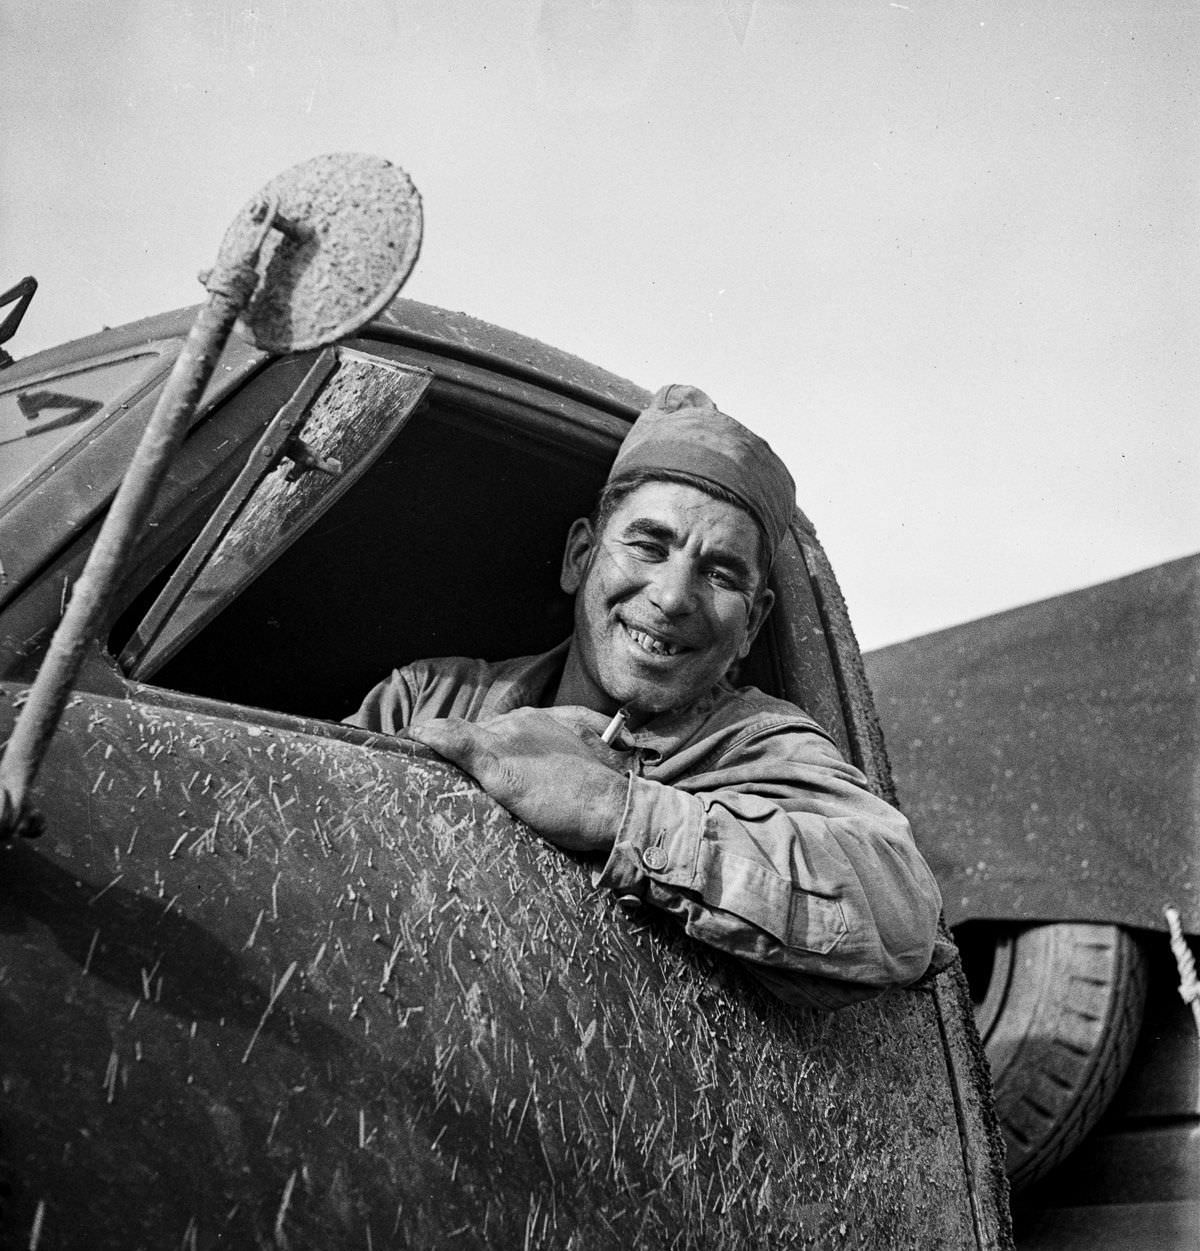 Corporal Oliver R. Wechsler of Anderson, Indiana, a mechanic in civilian life.